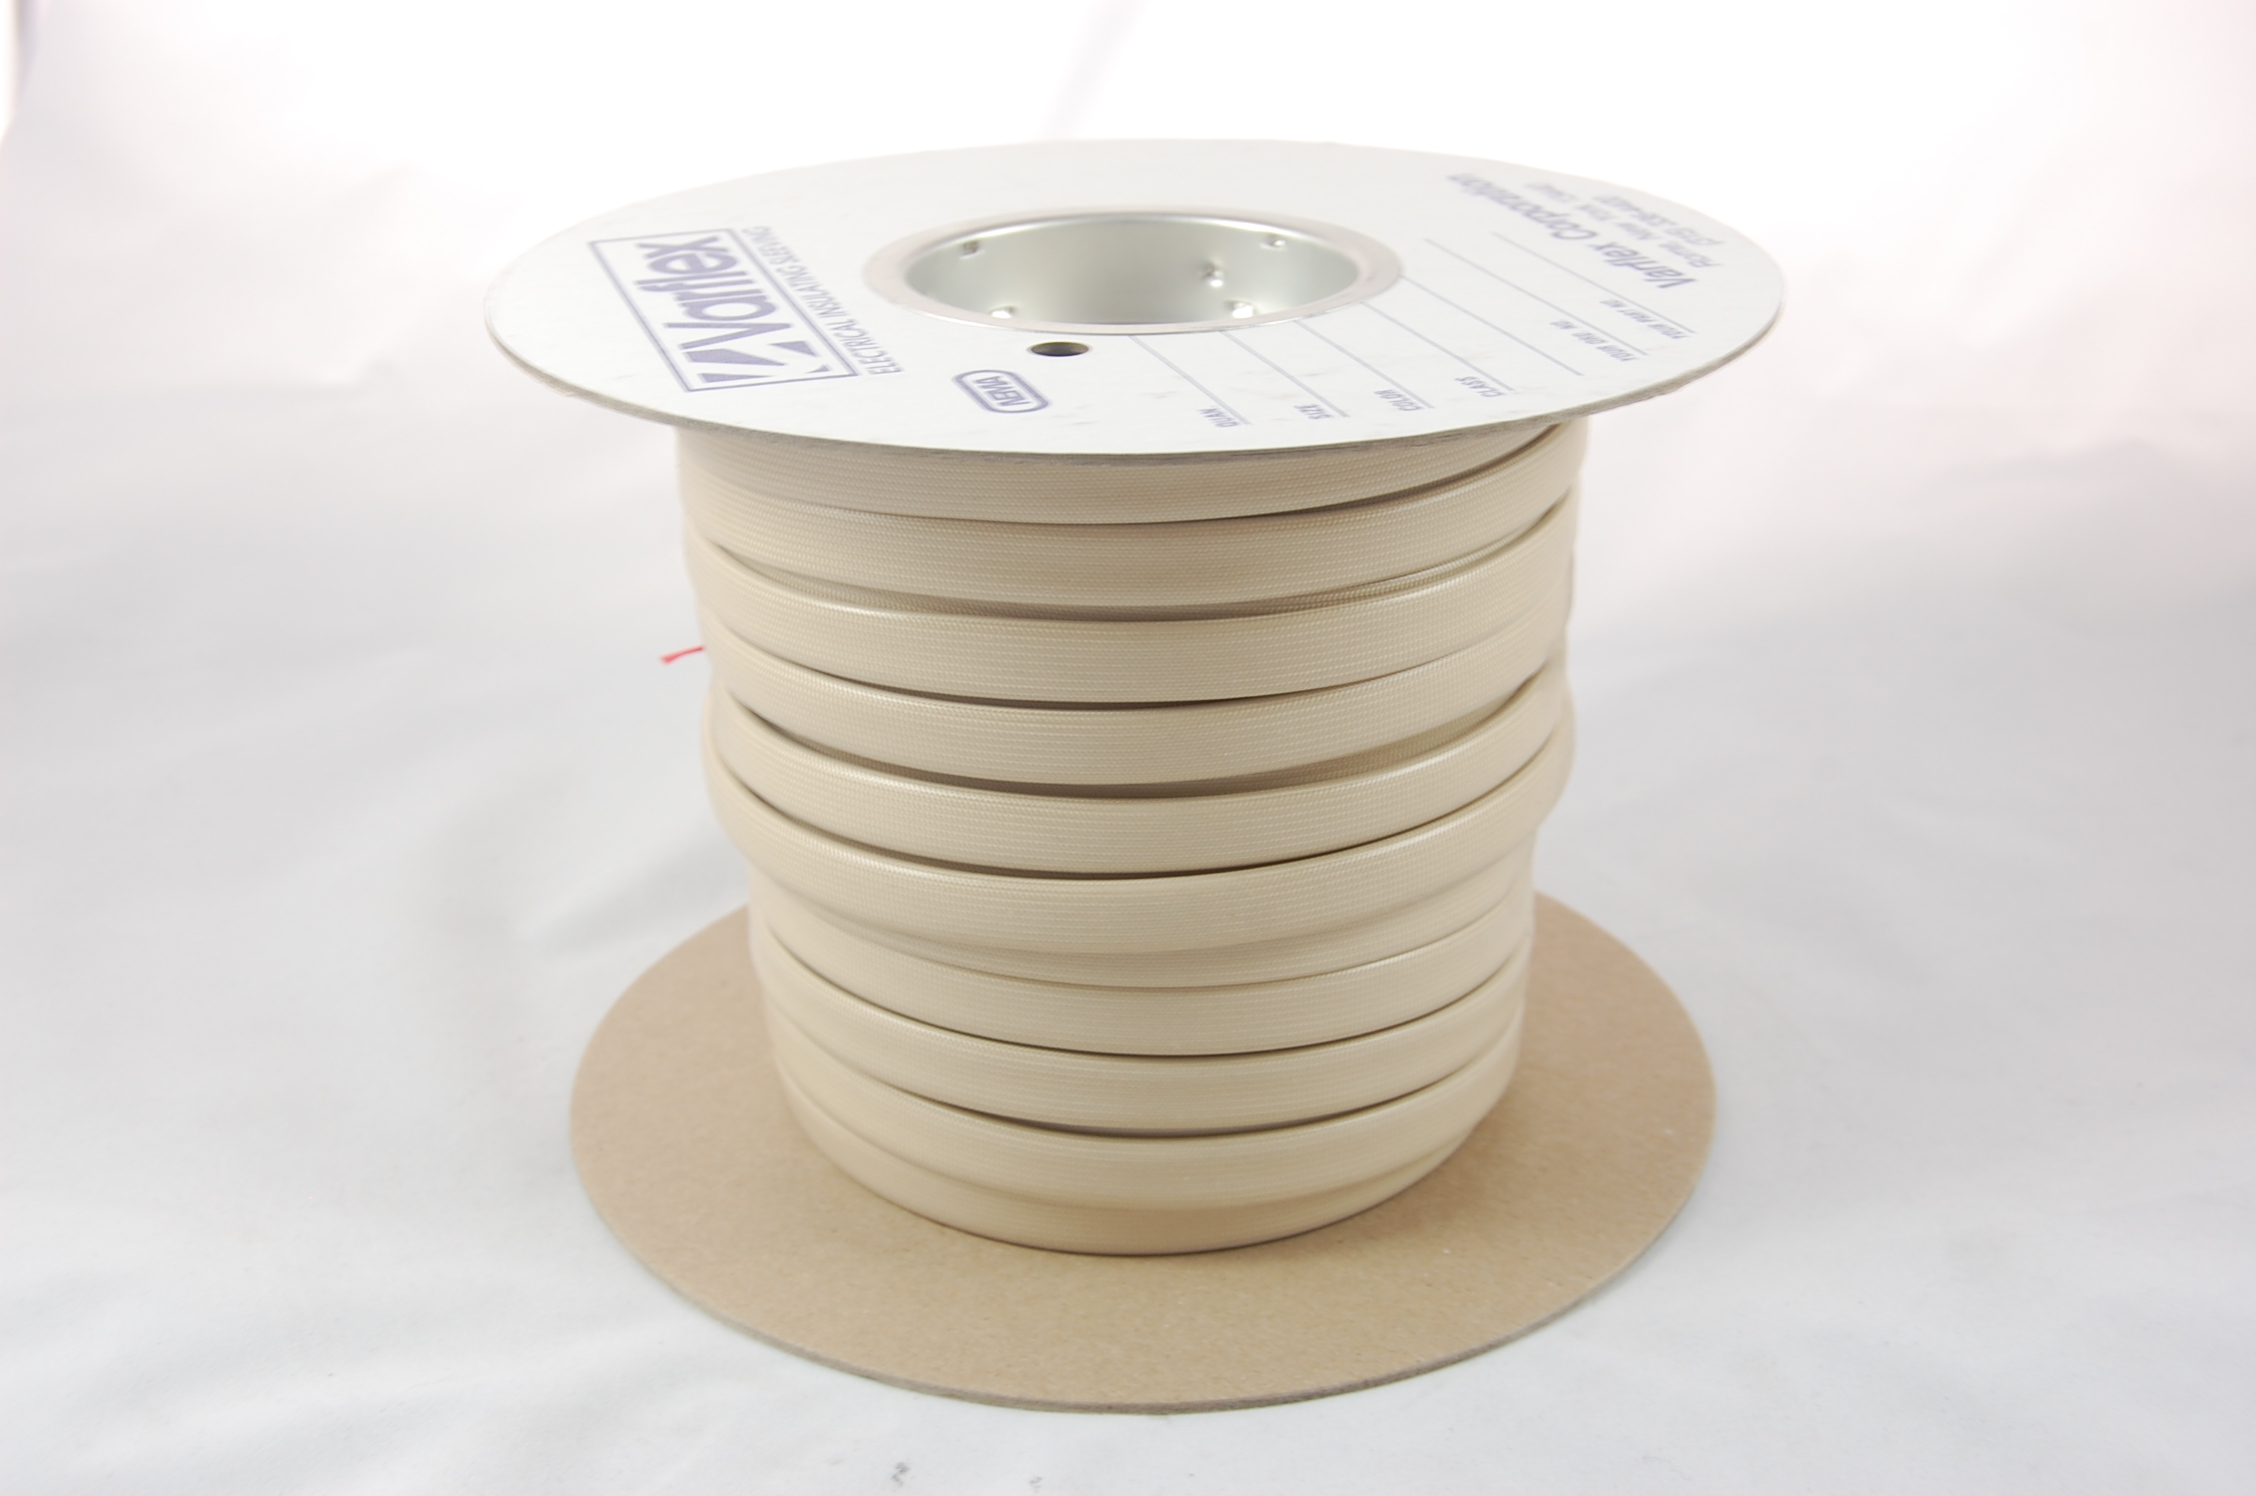 #9 AWG Varglas Silicone Rubber Grade H-A-1 (8000V) High Temperature Silicone Rubber Coated Braided Fiberglass Sleeving 200°C, natural, 150 FT per spool